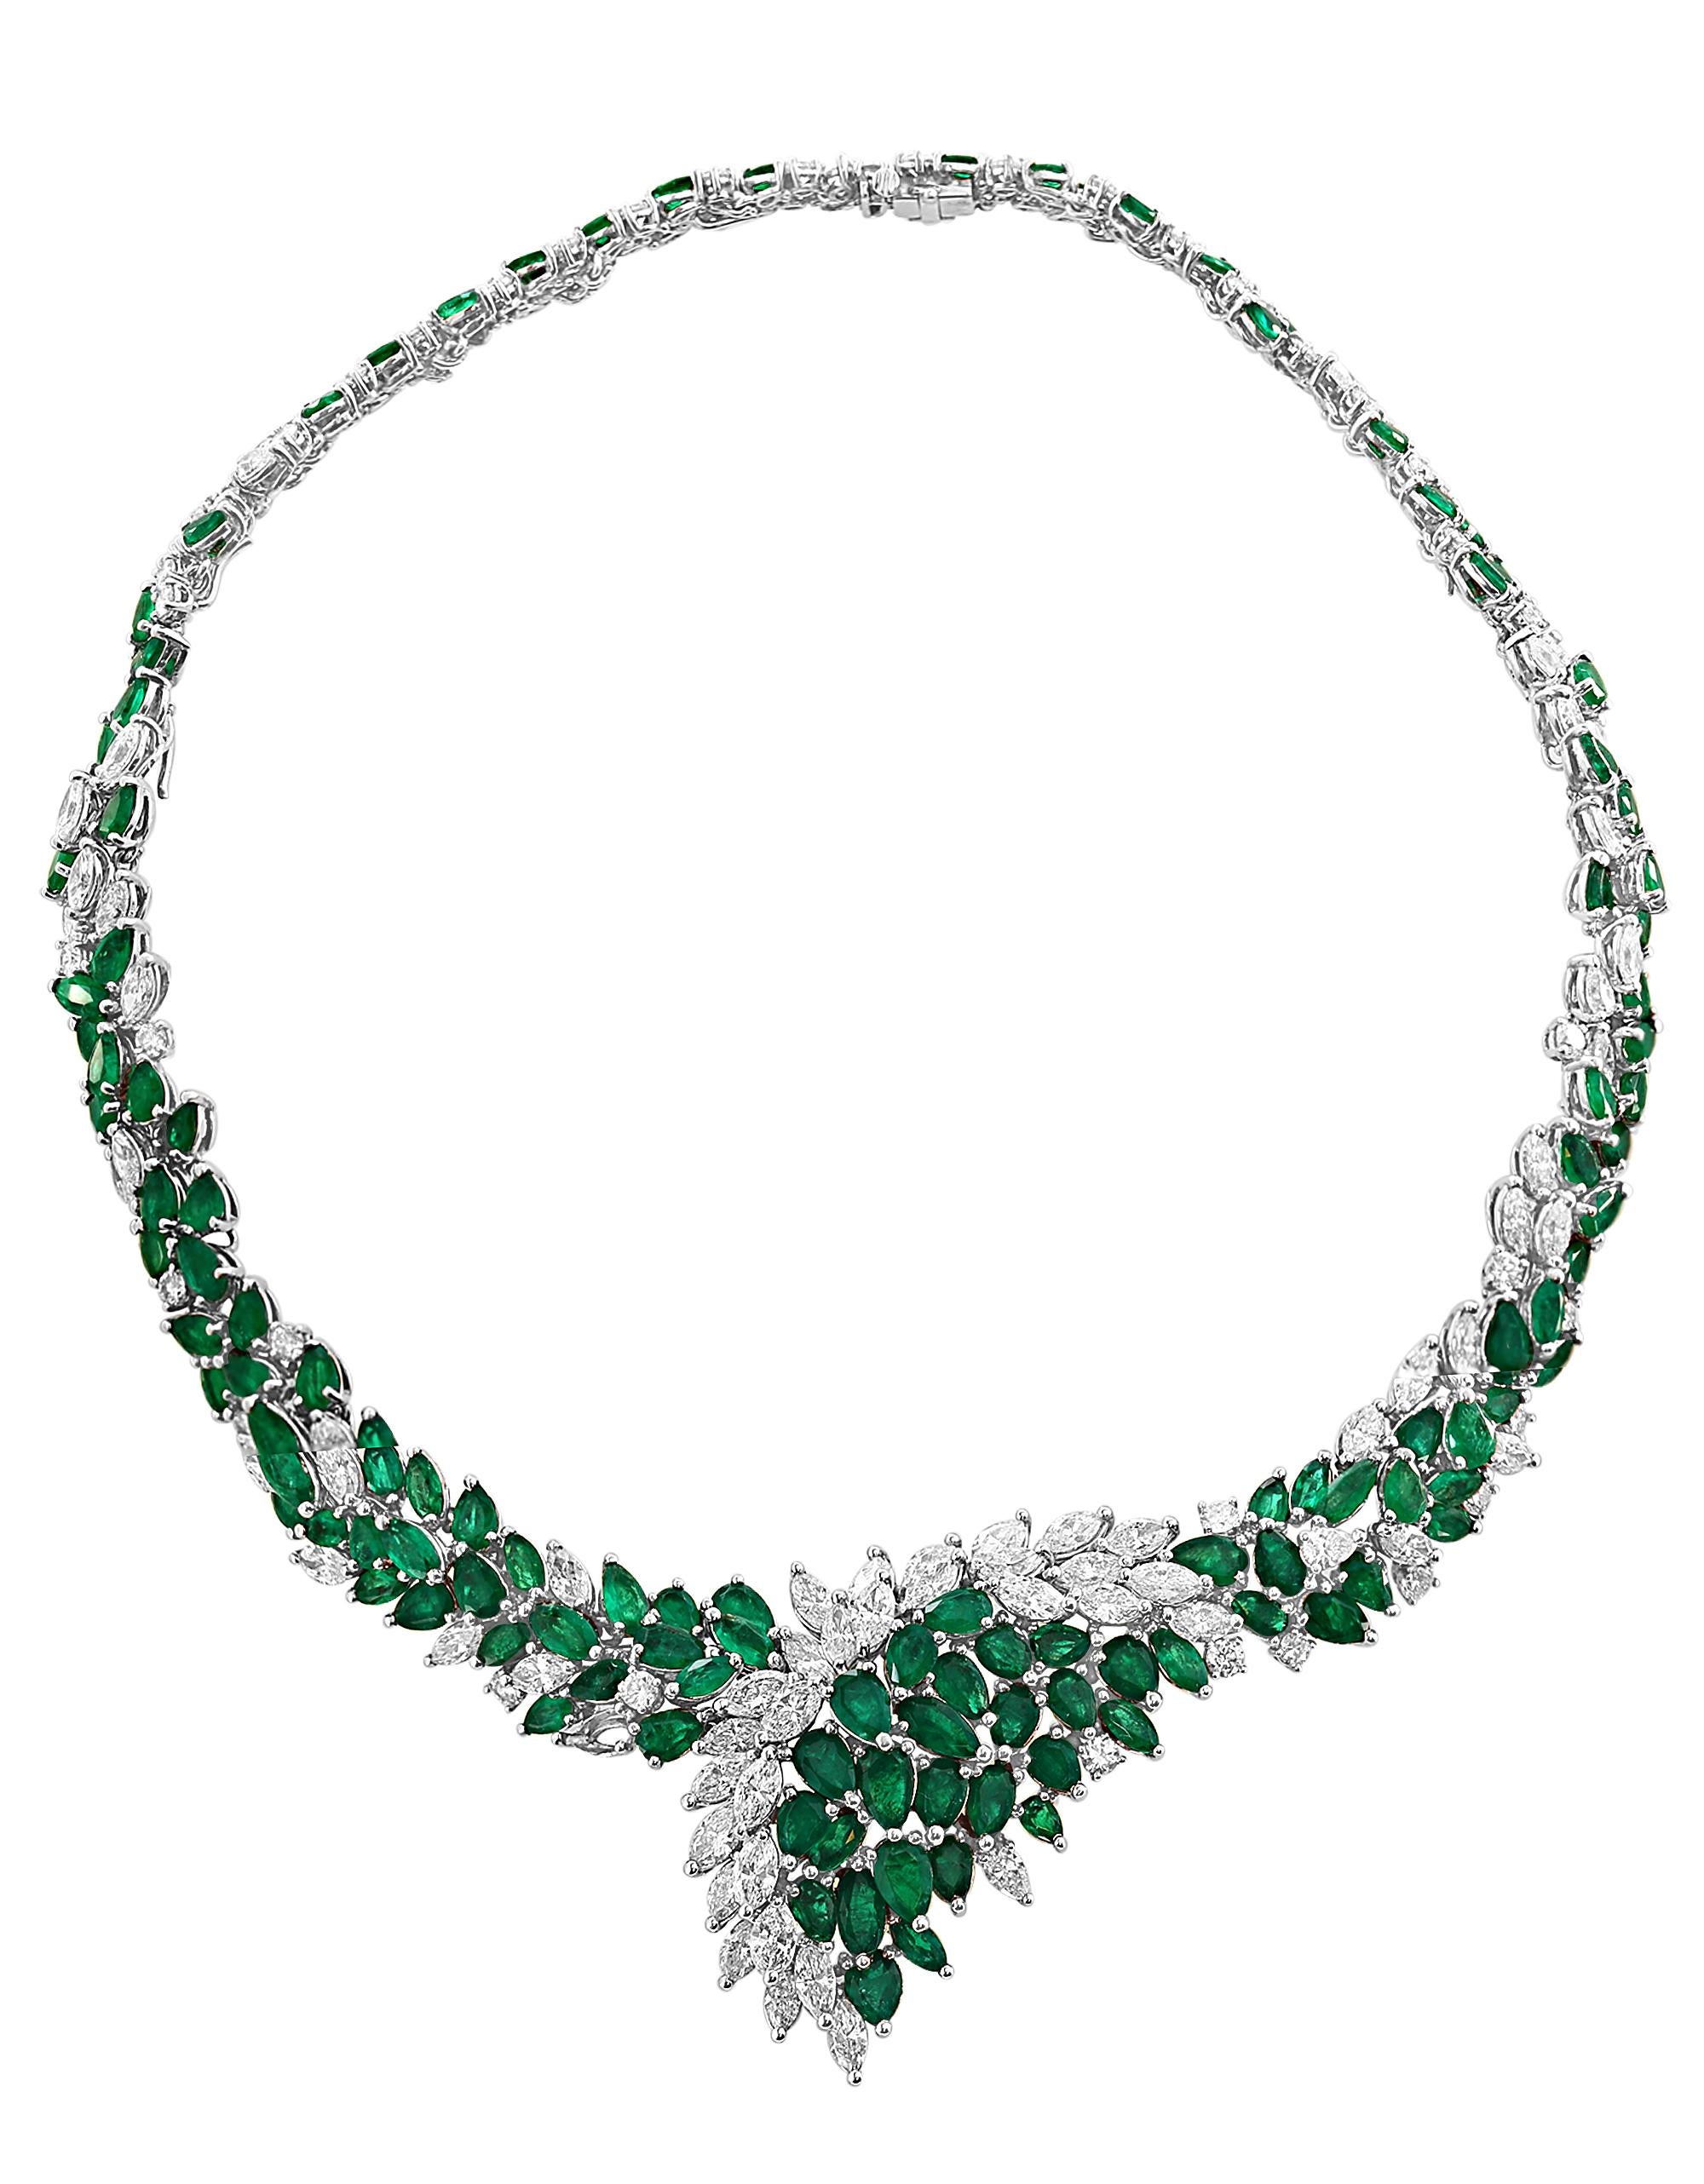 Platinum Colombian  Emerald and diamond  necklace, consisting several Marquis and Pear shape  Colombian Emeralds approximately 40 Carat  of Colombian Emerald  and 35 Carats brilliant cut round and Marquise diamonds surrounding it .
The Necklace